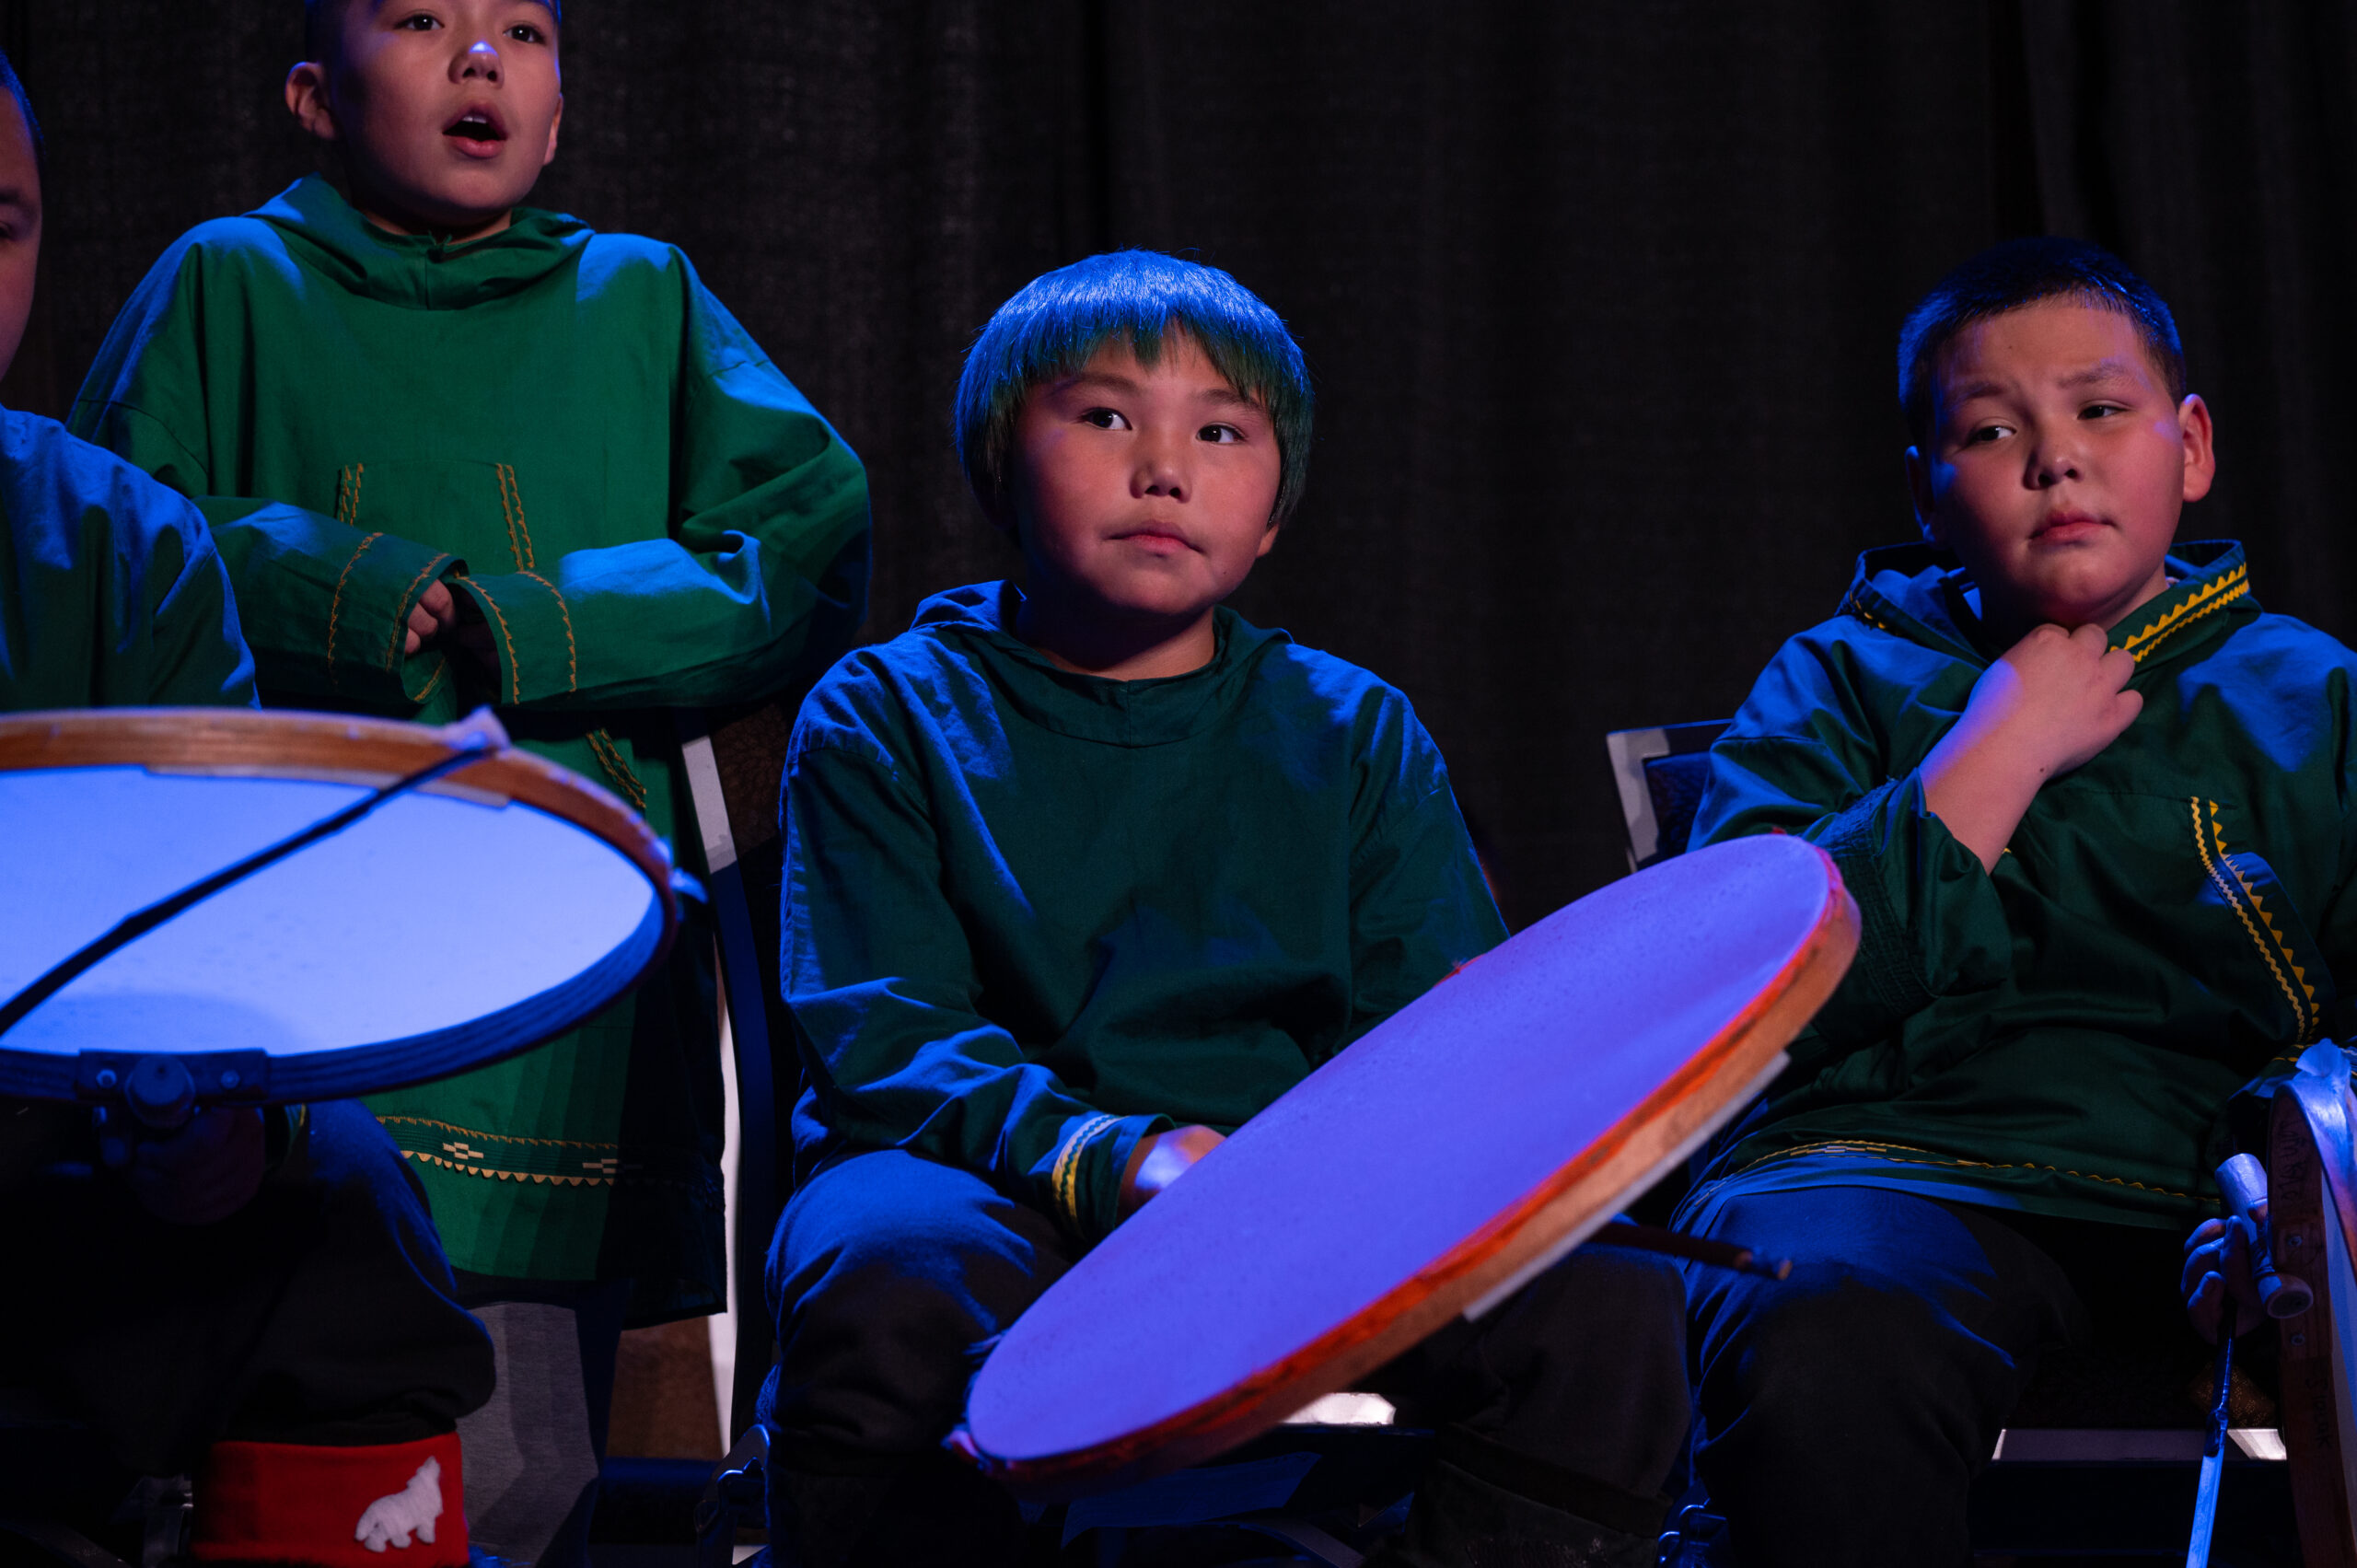 A group of boys sitting with native drums